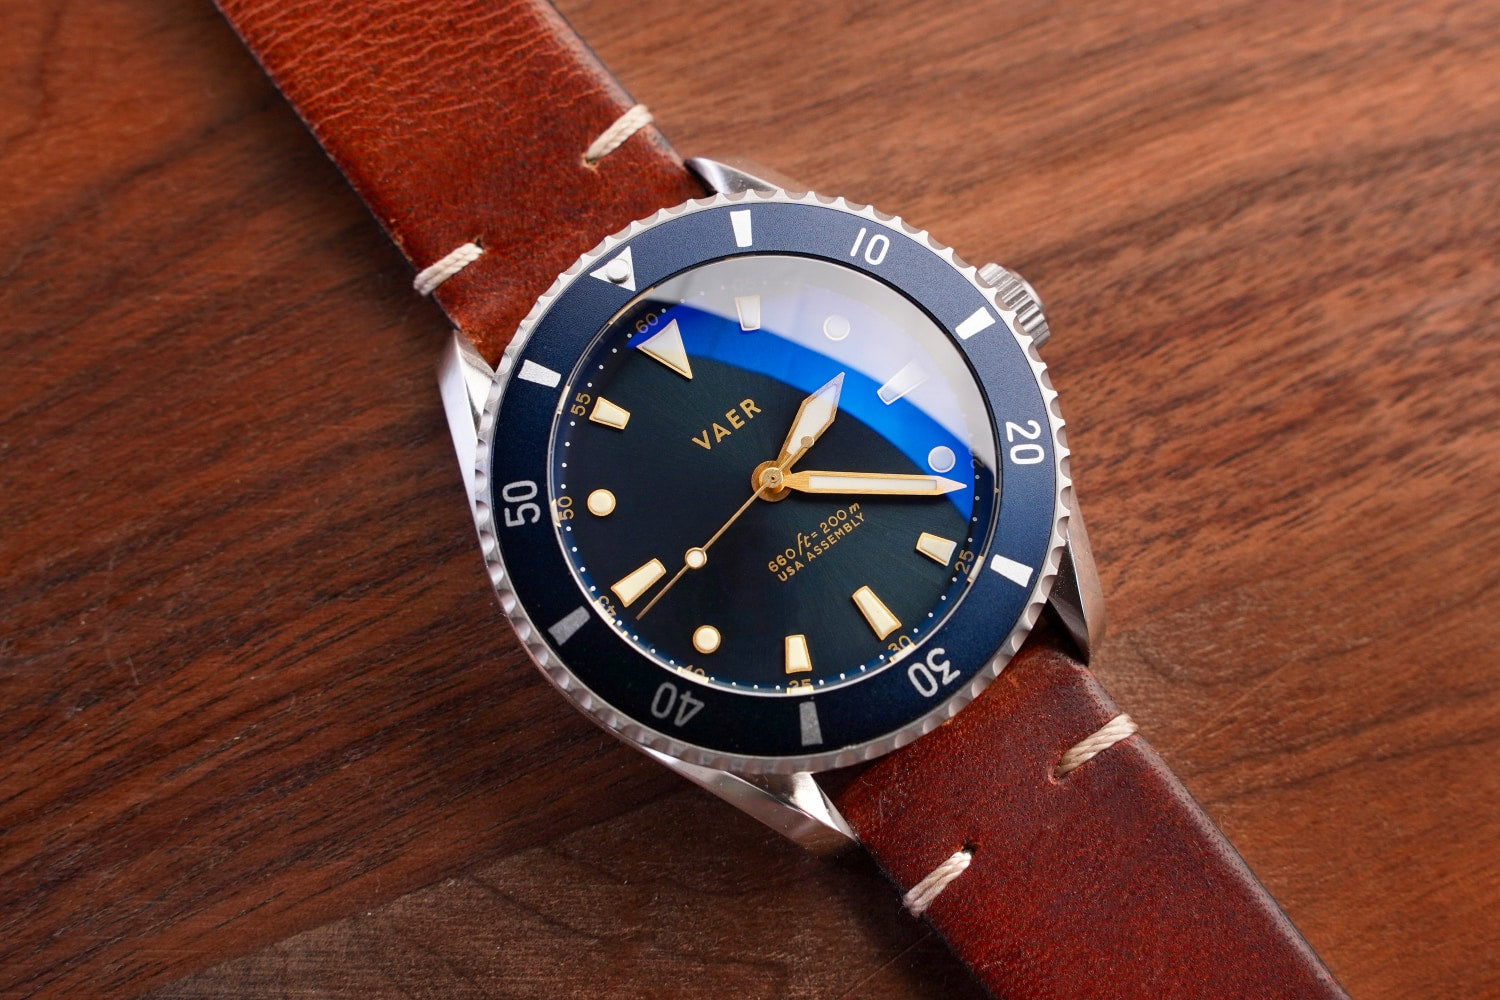 Updates on the Vaer Dive Watch: Photos, Specs, and Delivery Timelines